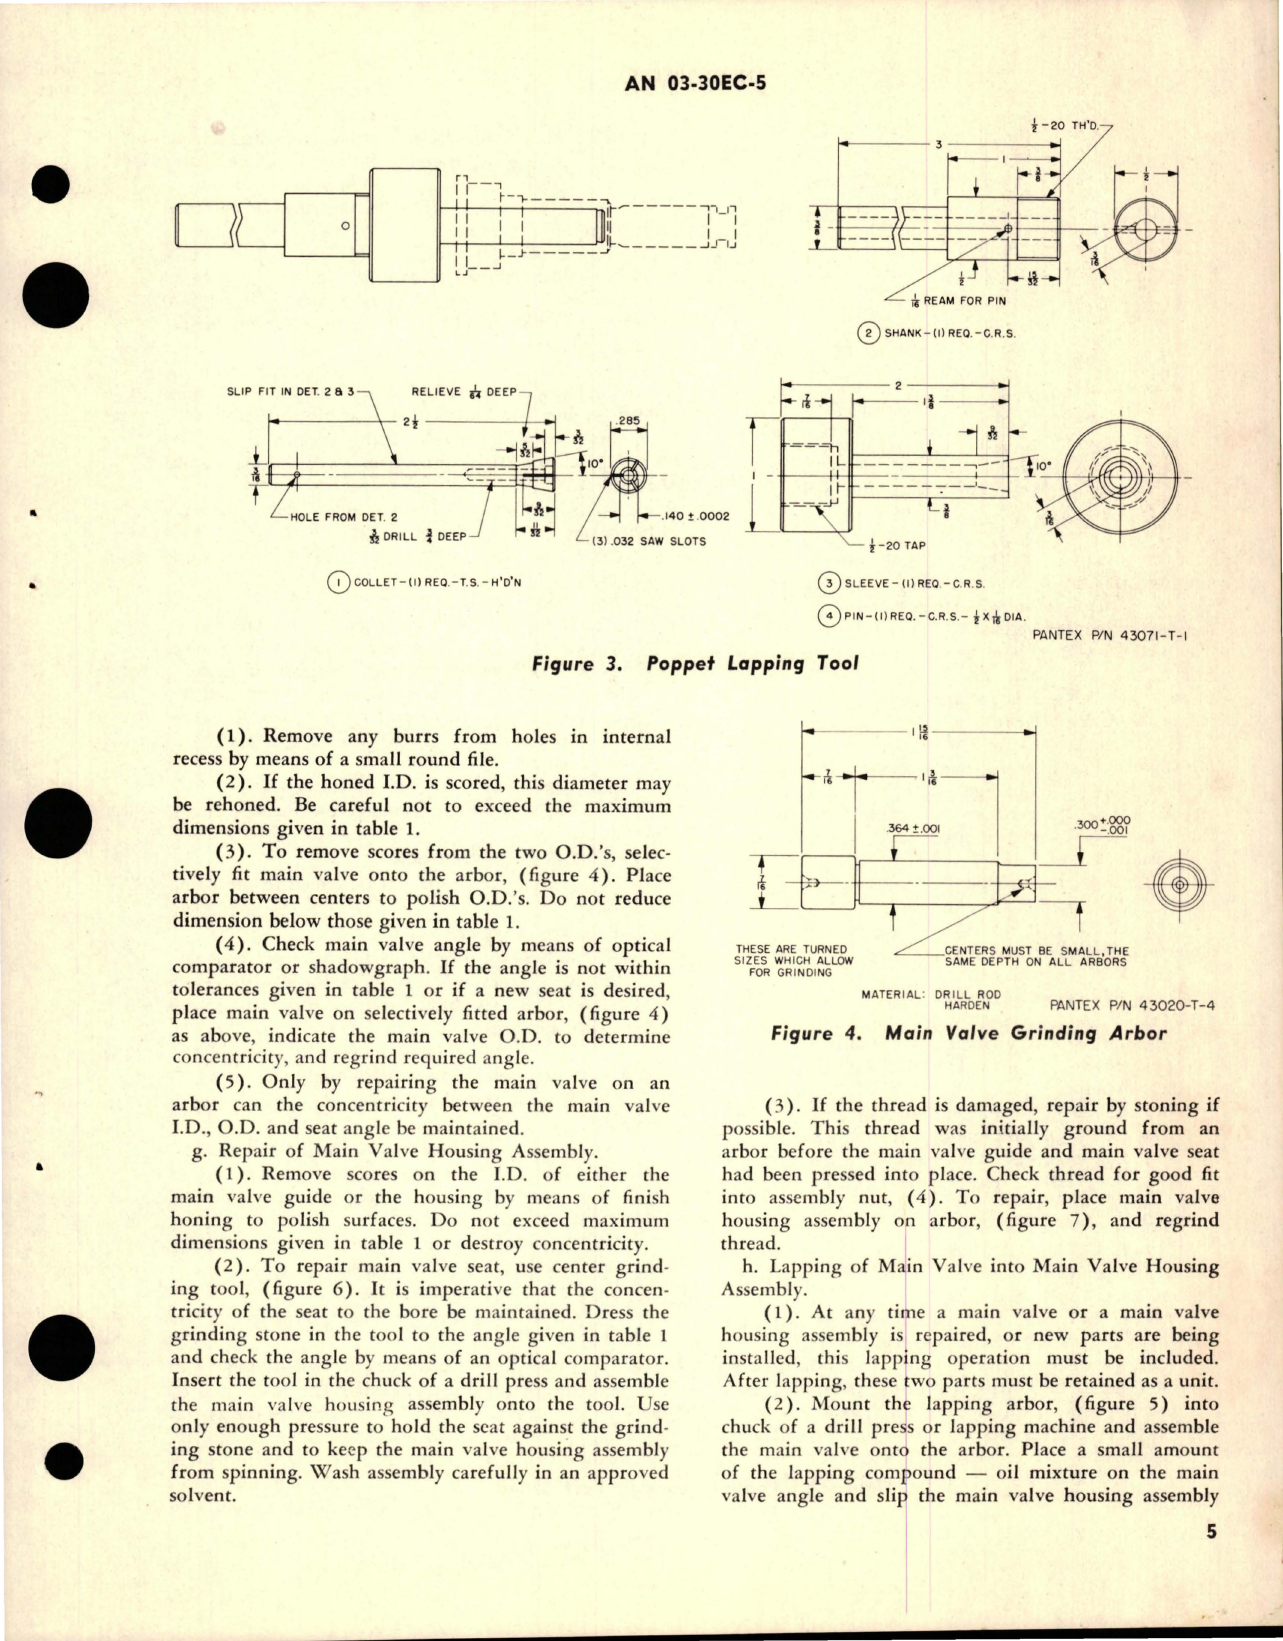 Sample page  5 from AirCorps Library document: Overhaul Instructions with Parts Breakdown for Hydraulic Pressure Relief Valve - HPLV-A2 